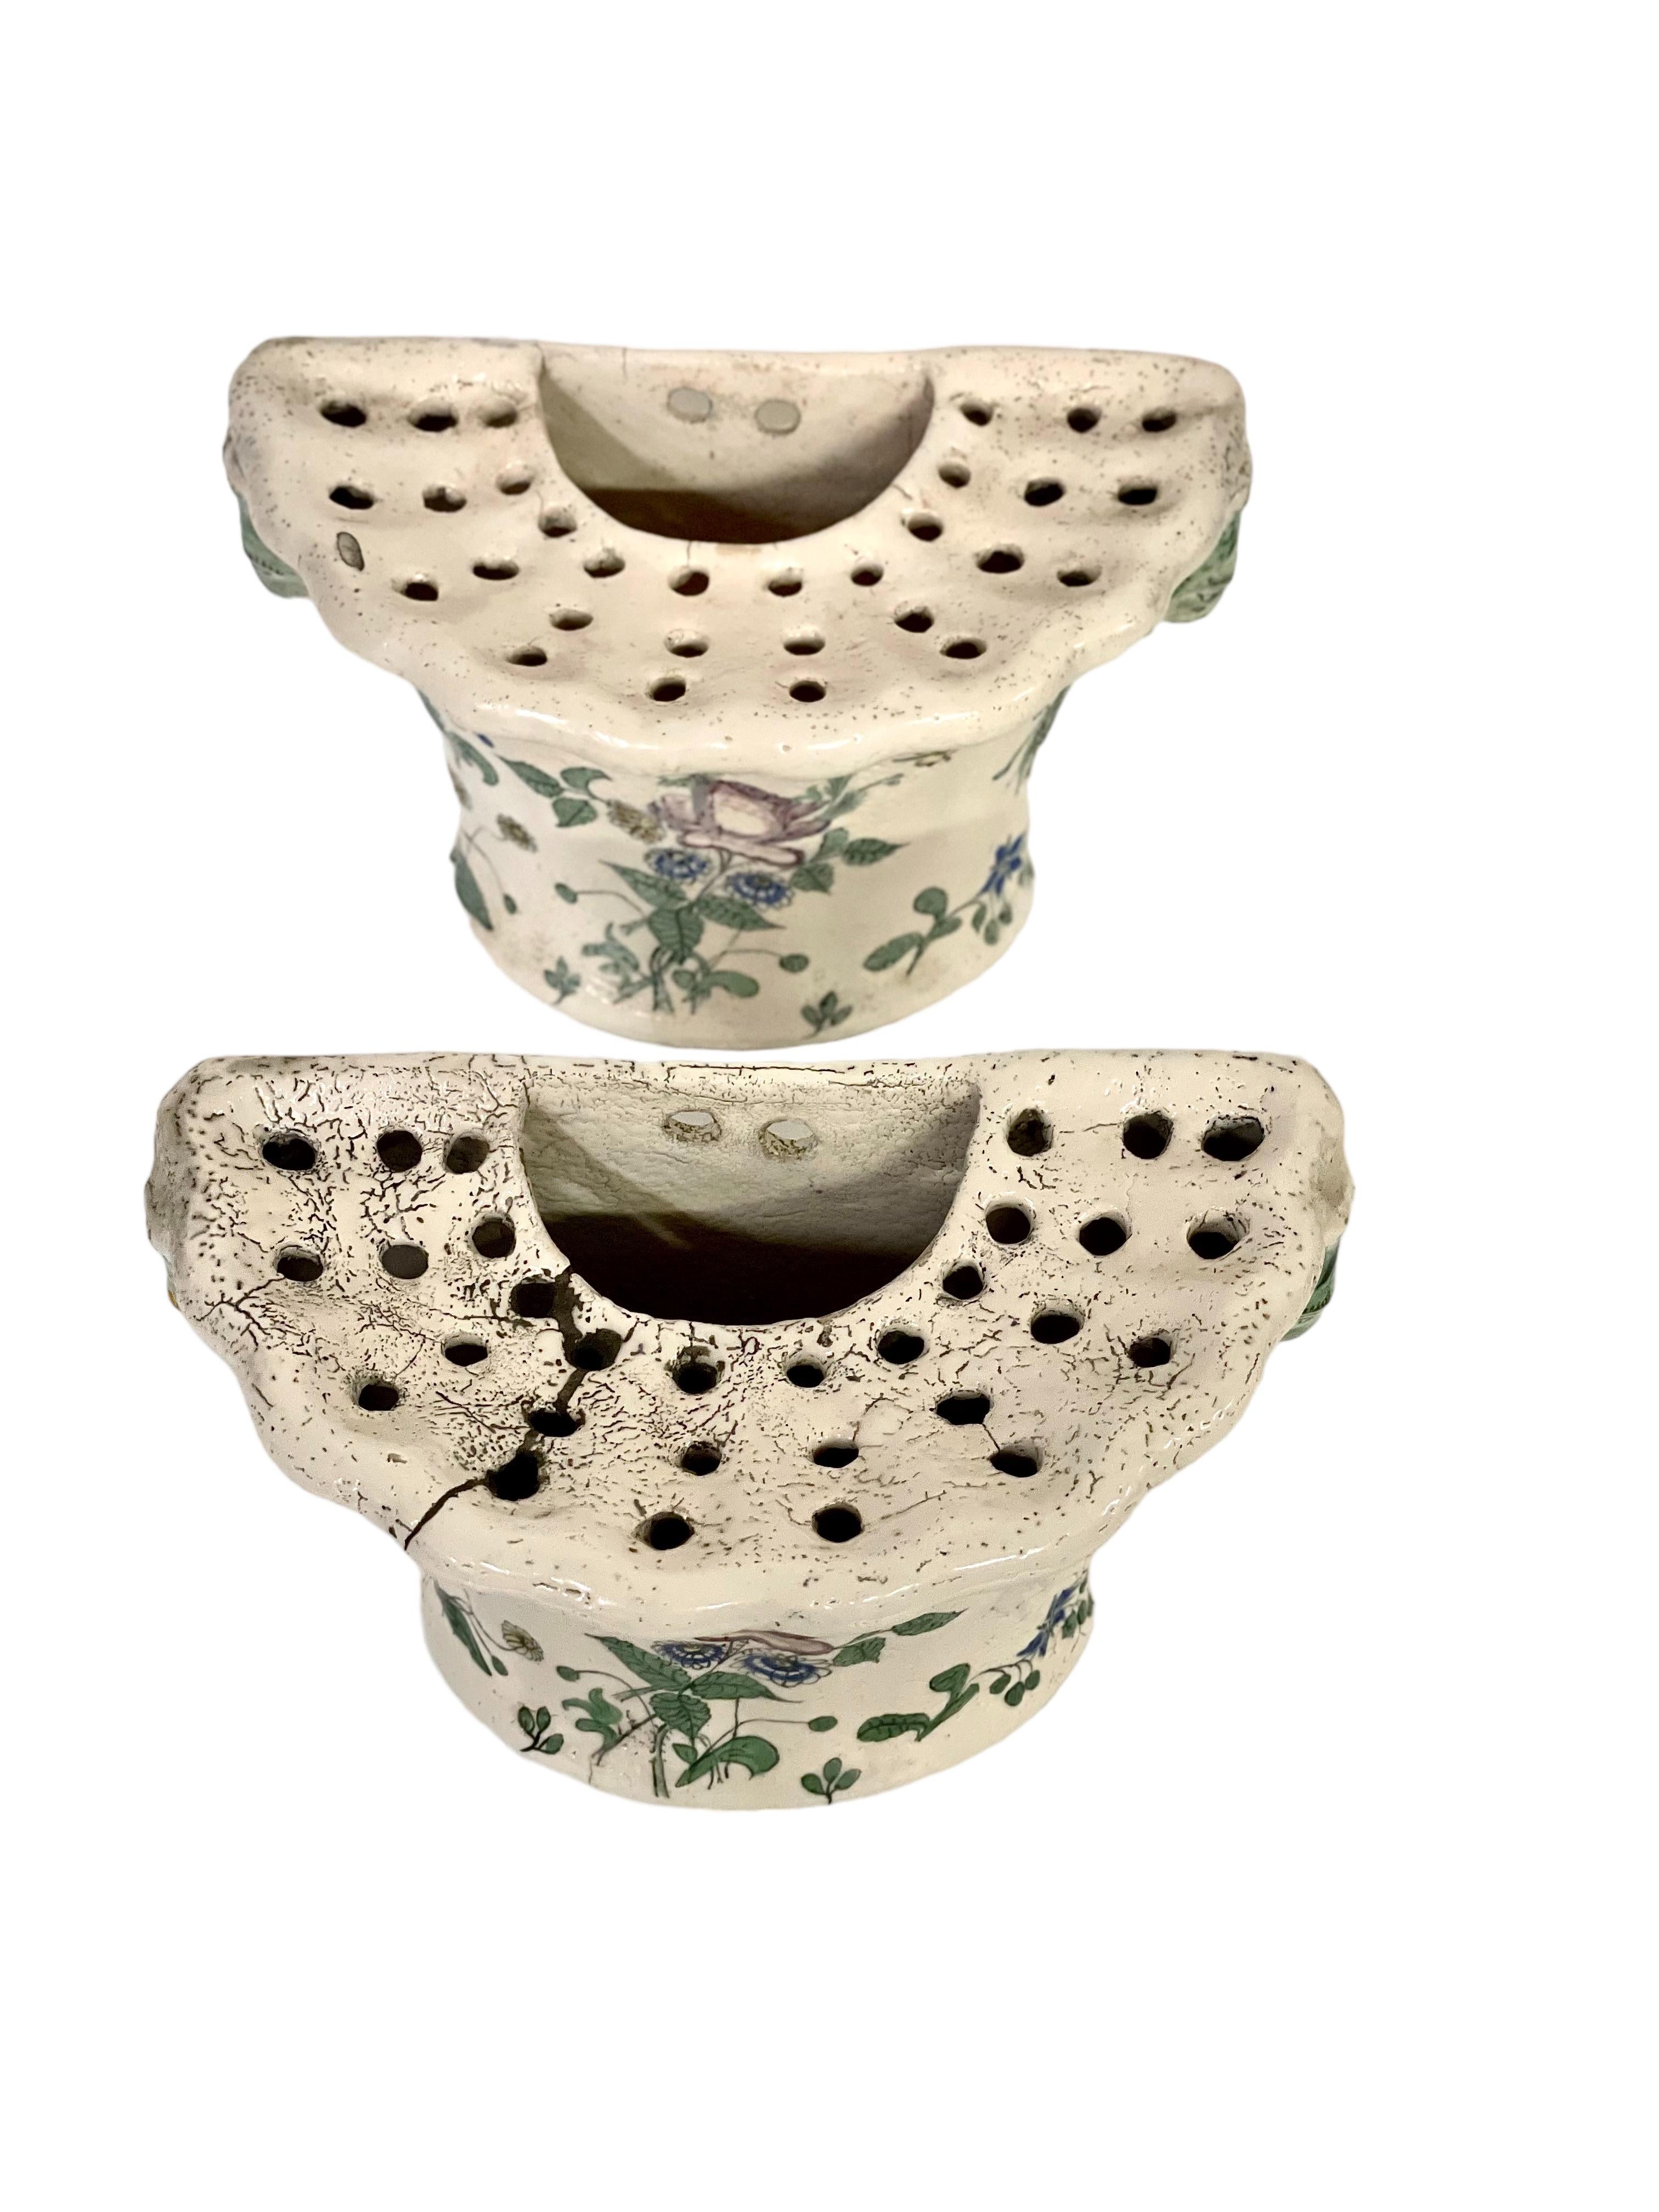 
A beautiful matching pair of glazed terracotta 'Bouquetières', or wall-hung flower vases, rustic in style and dating from the 18th century. Each of these delightful vases is created in a D- shape, with a gadrooned outer edge, thirty stem holes and